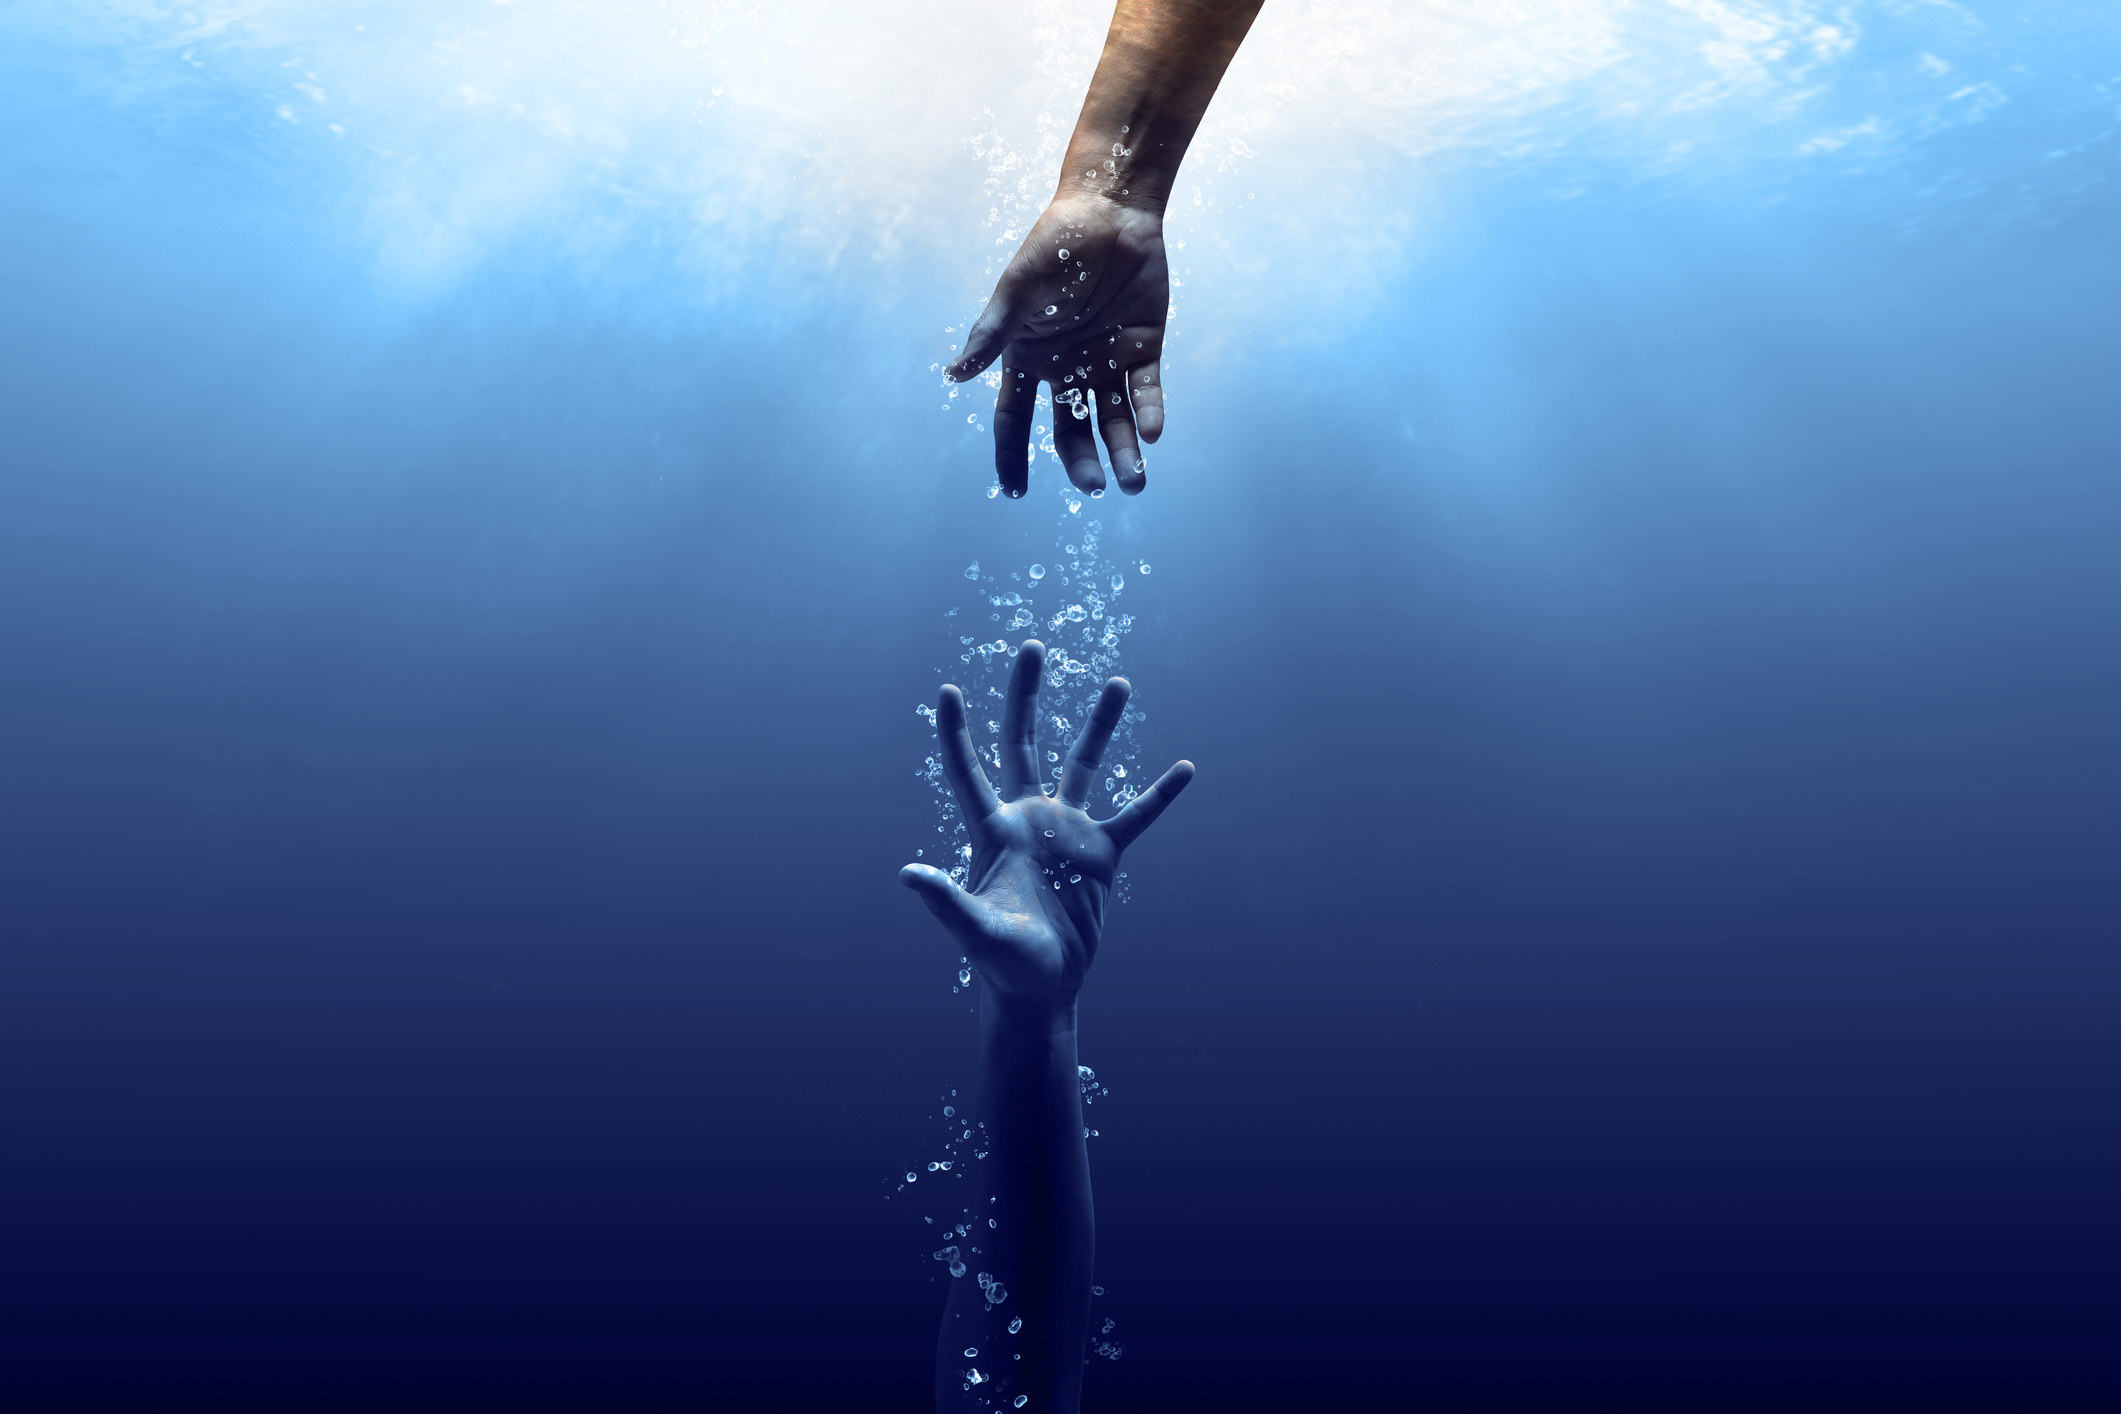 A hand reaching for another hand underwater